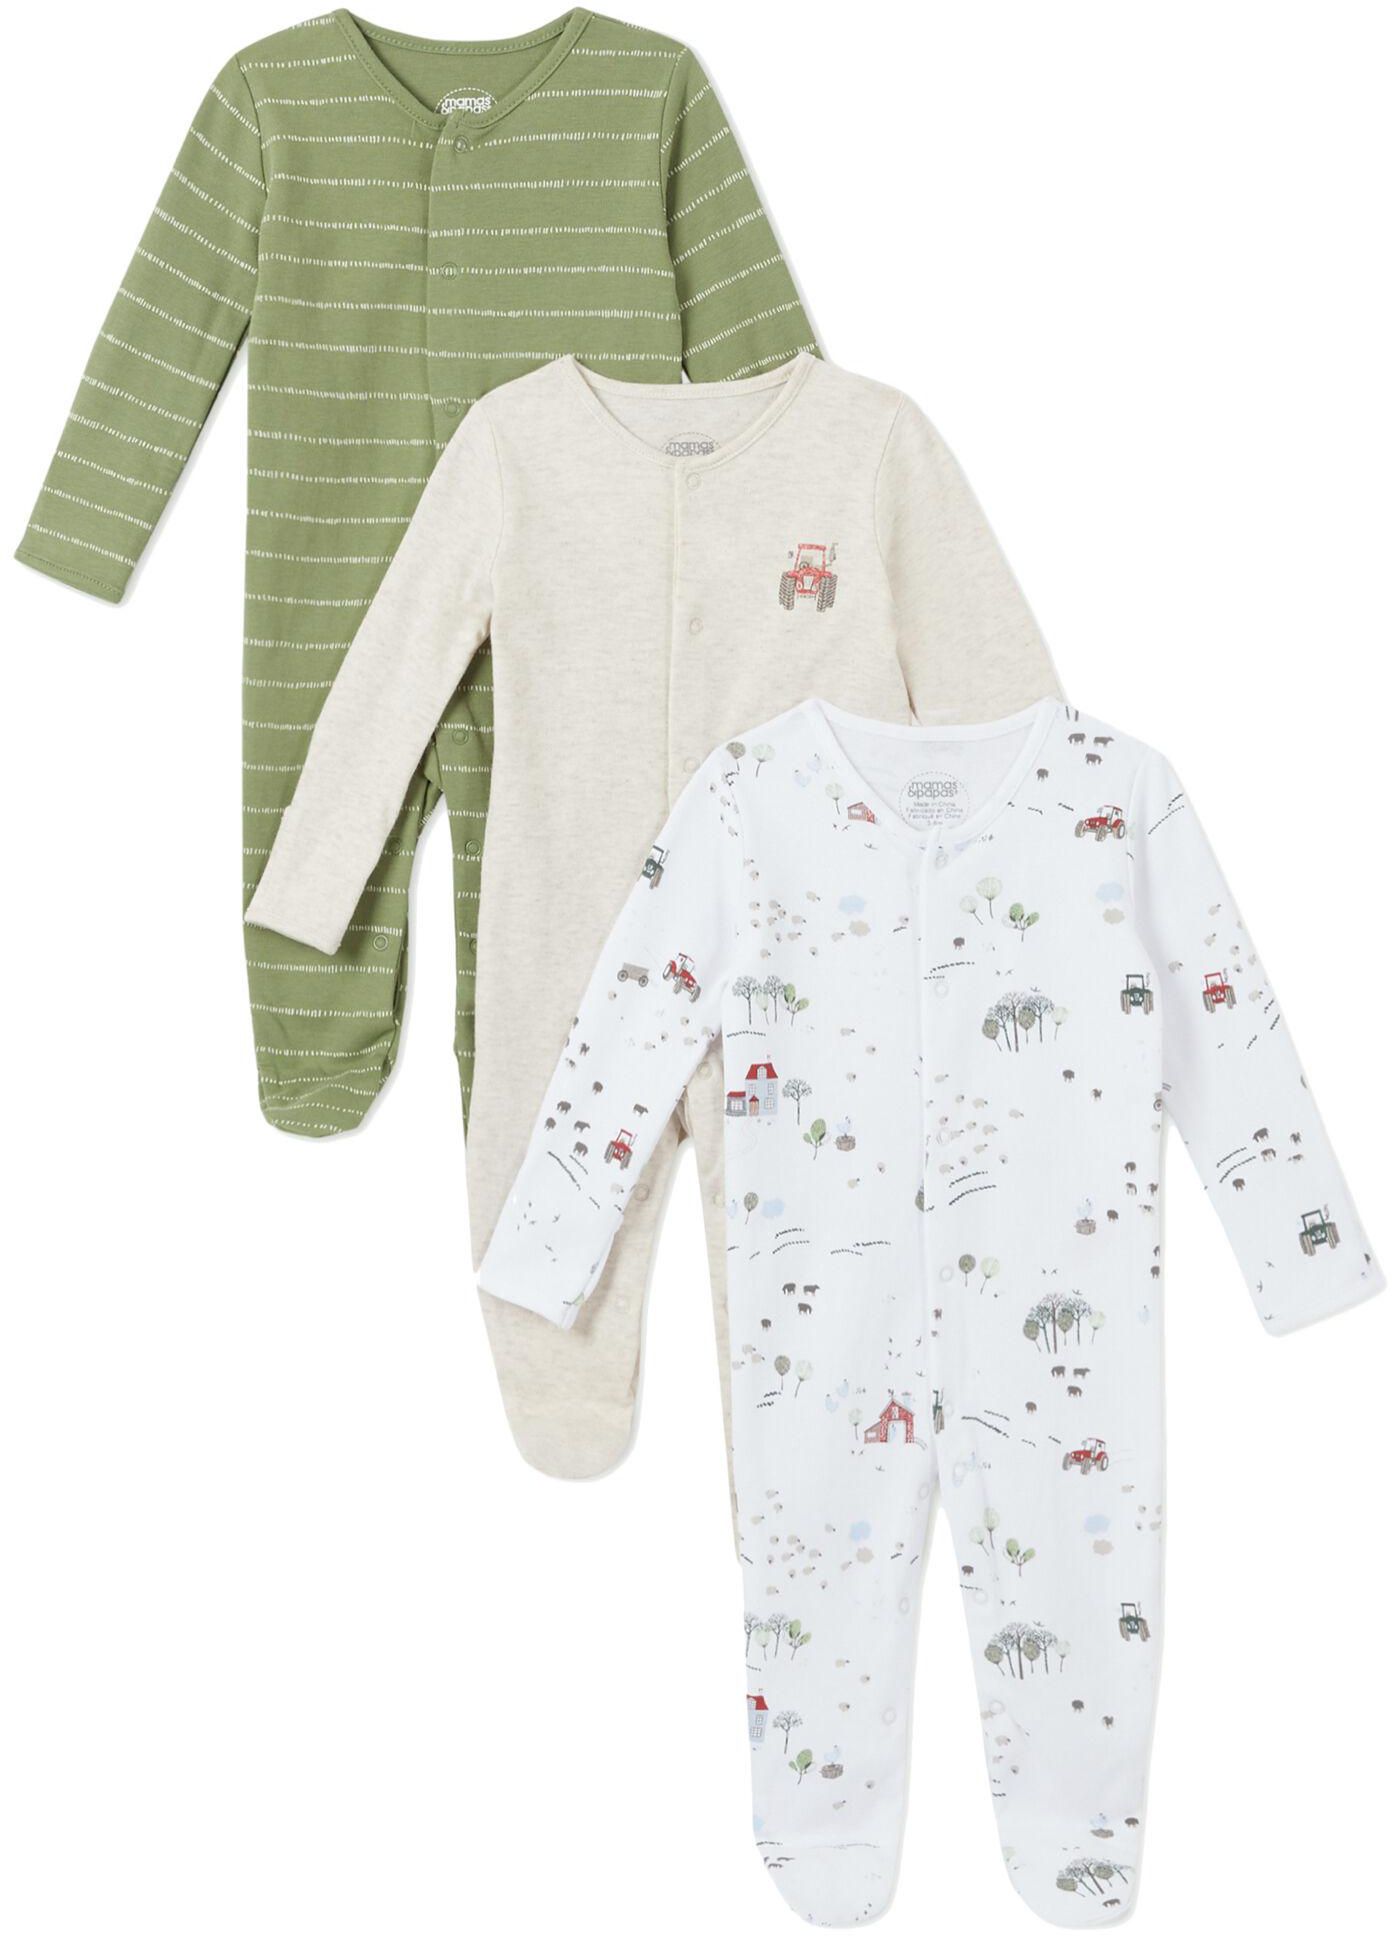 Tractor Sleepsuits 3 Pack